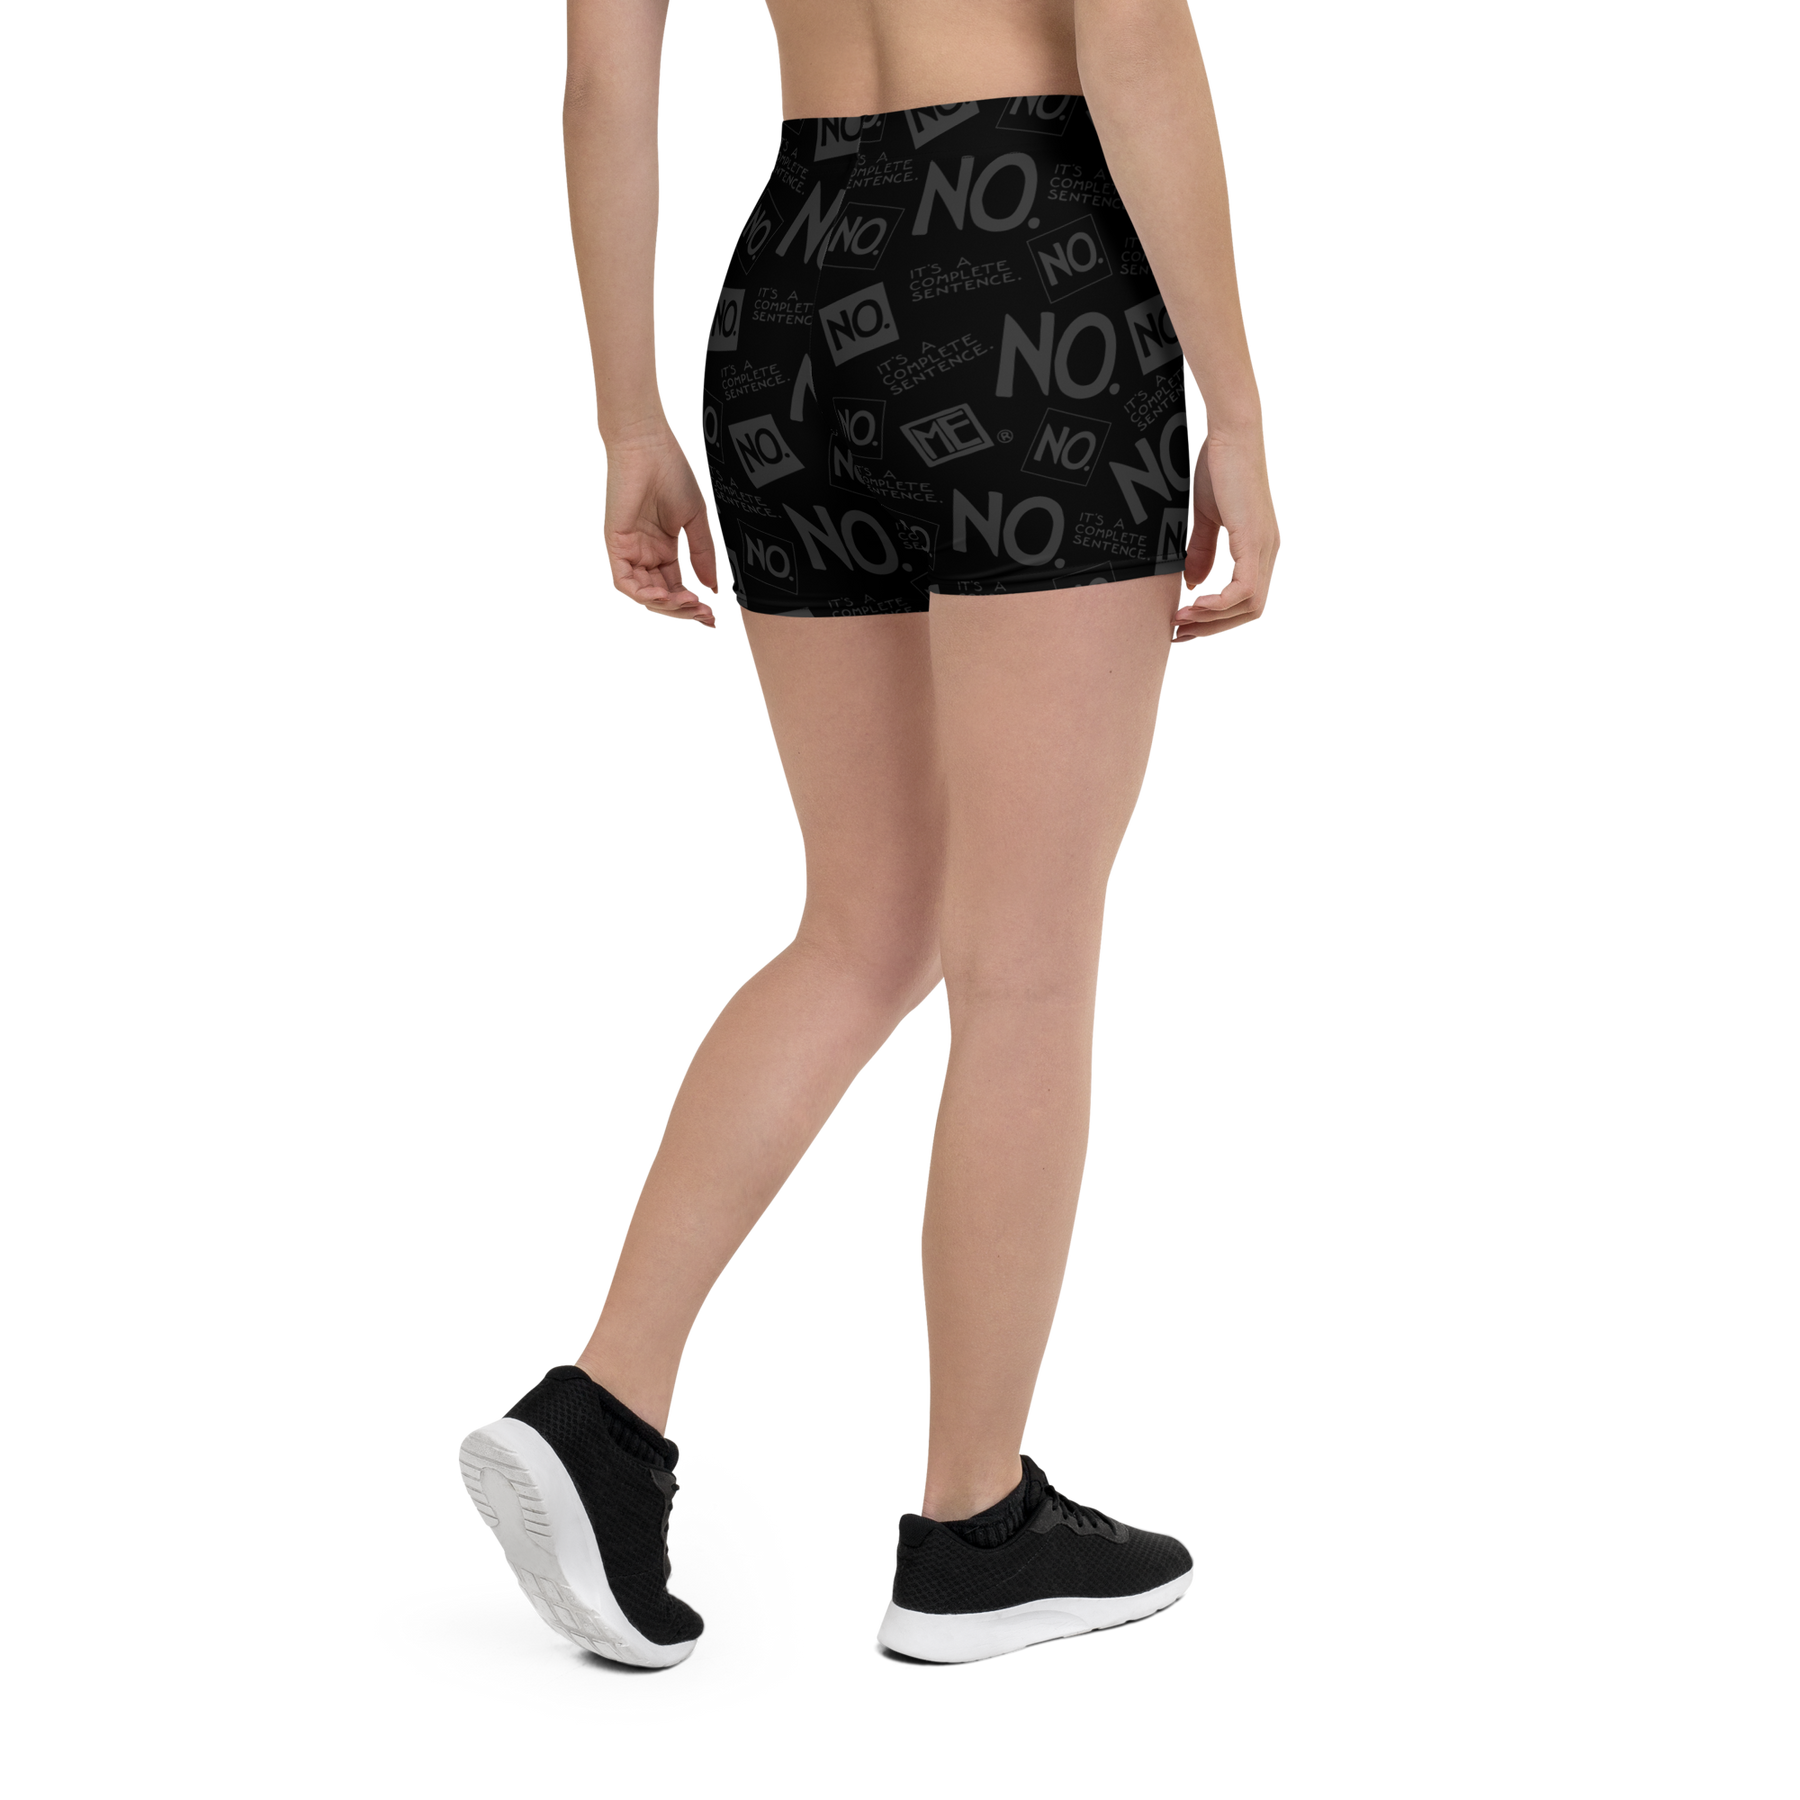 Complete Sentence Charcoal Shorts